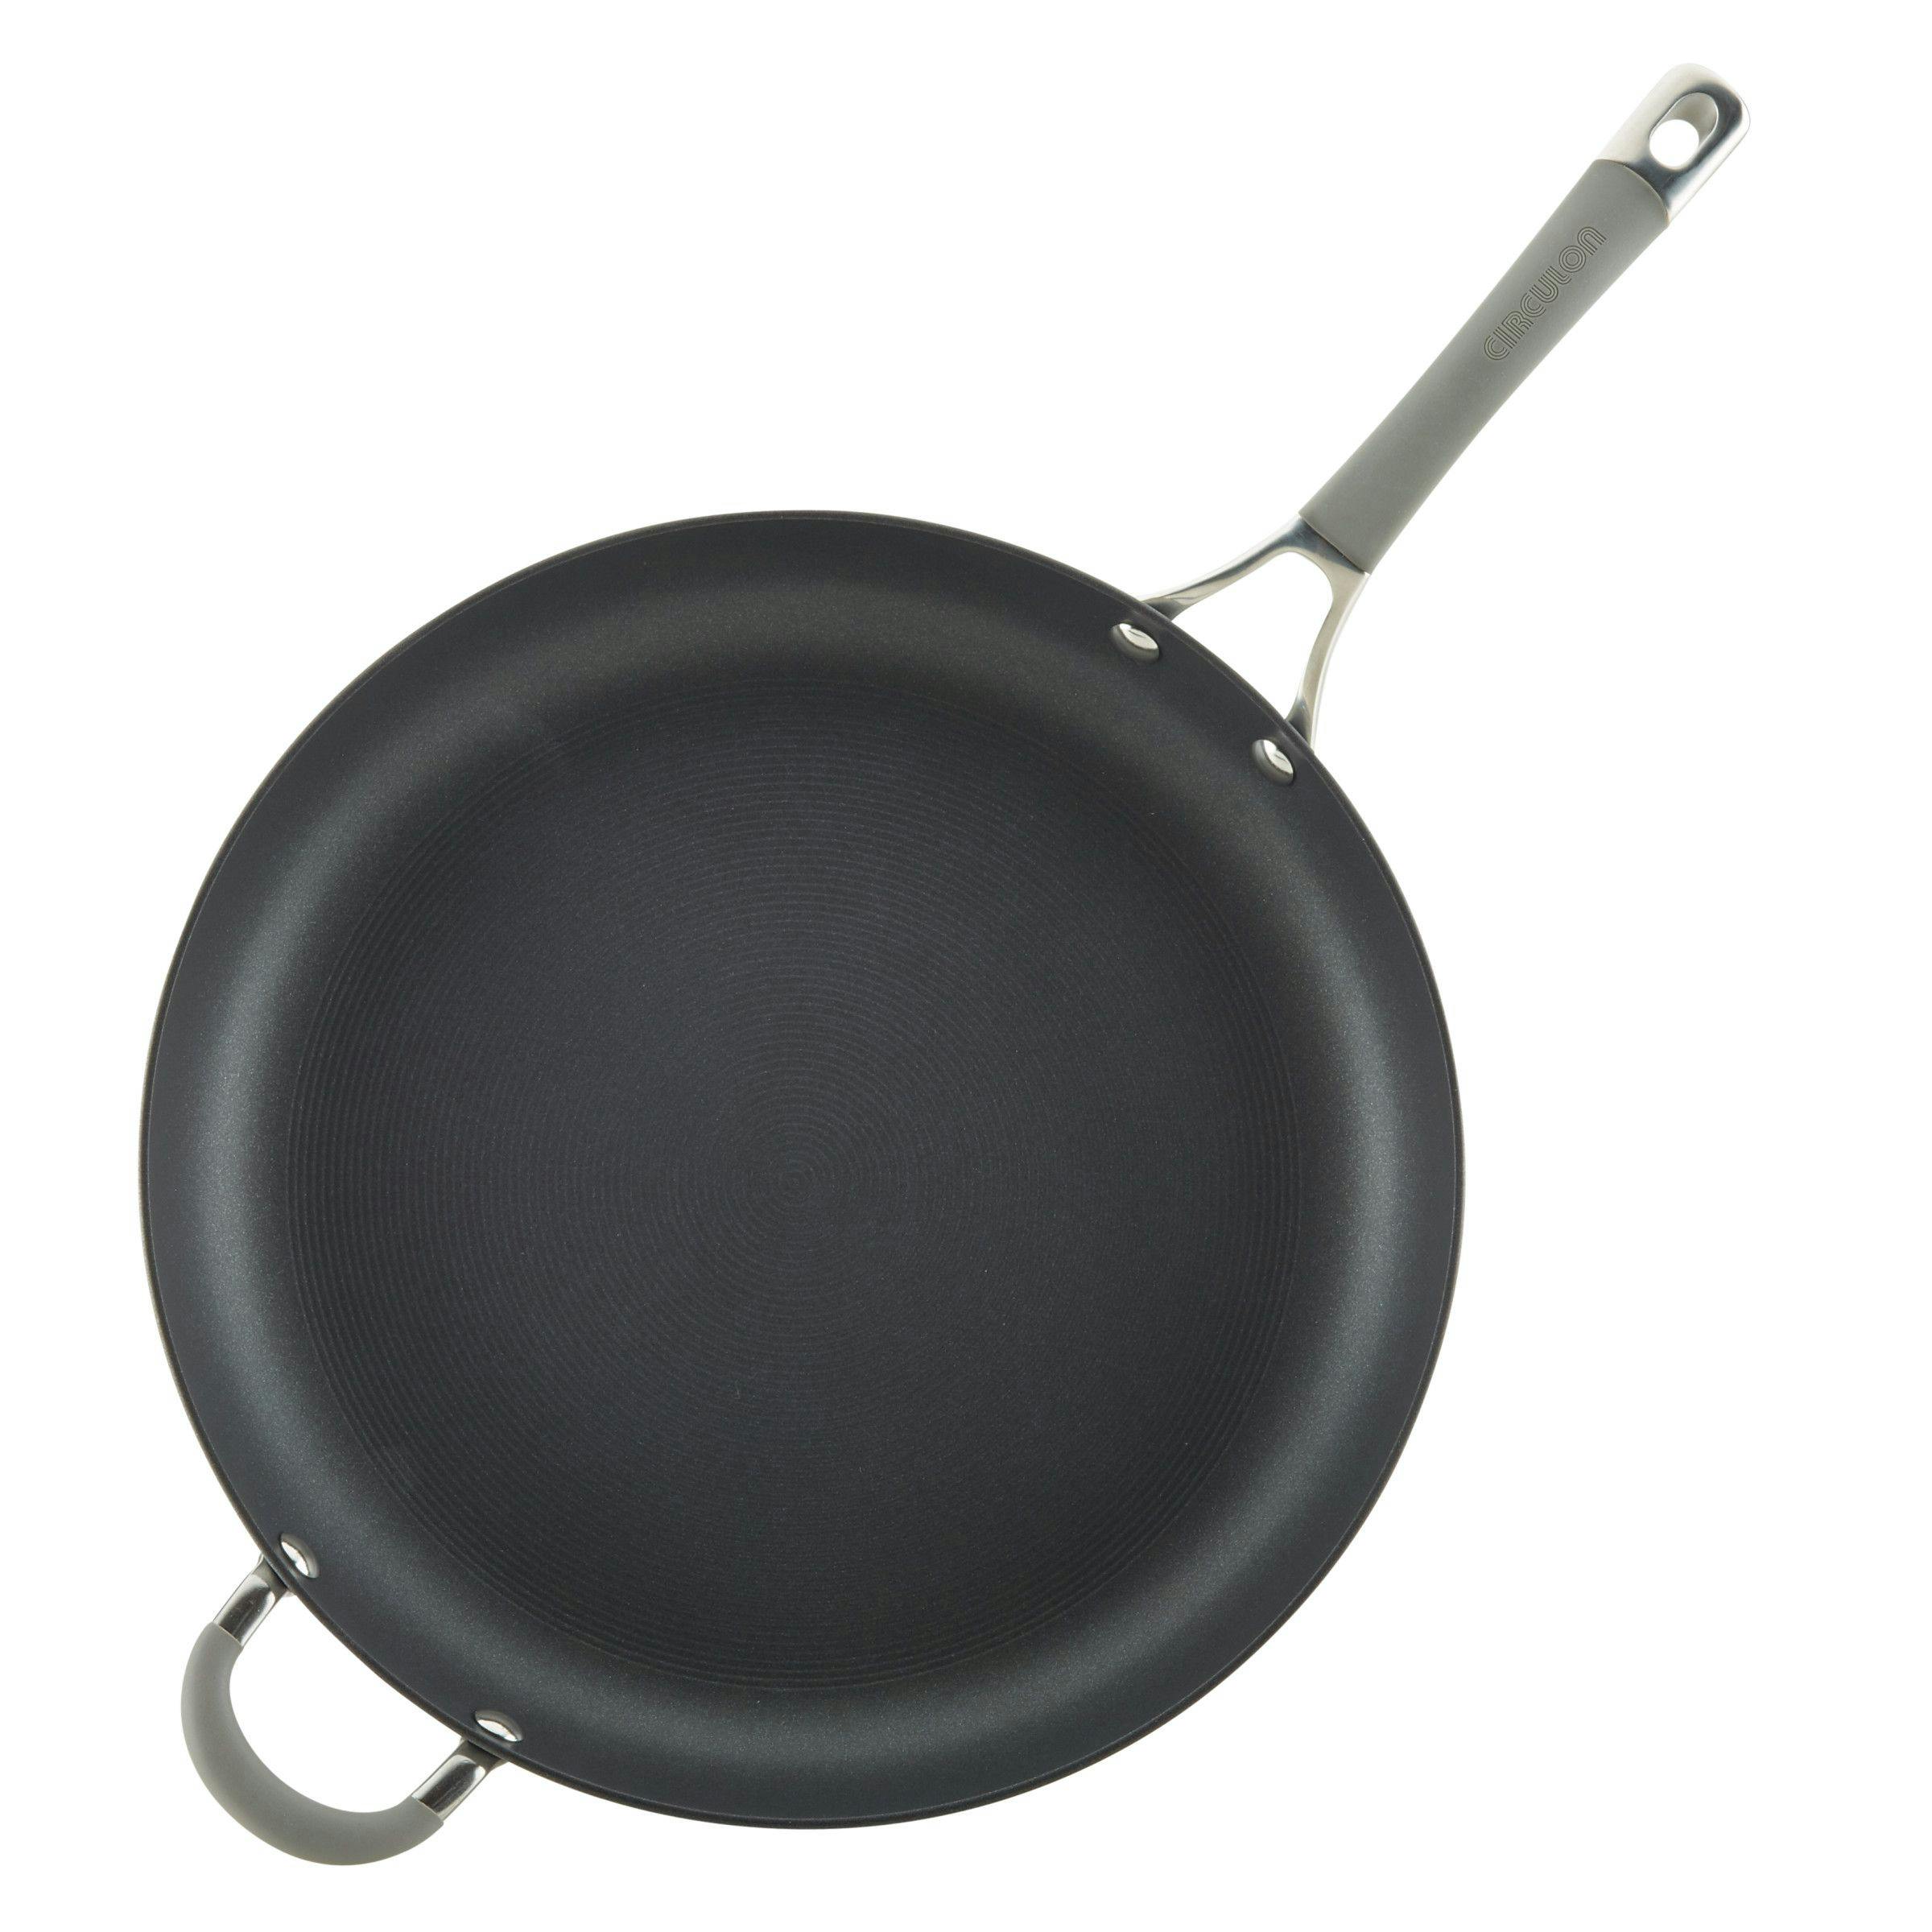 Circulon Elementum Hard-Anodized Nonstick Frying Pan with Helper Handle, 14-Inch, Oyster Gray